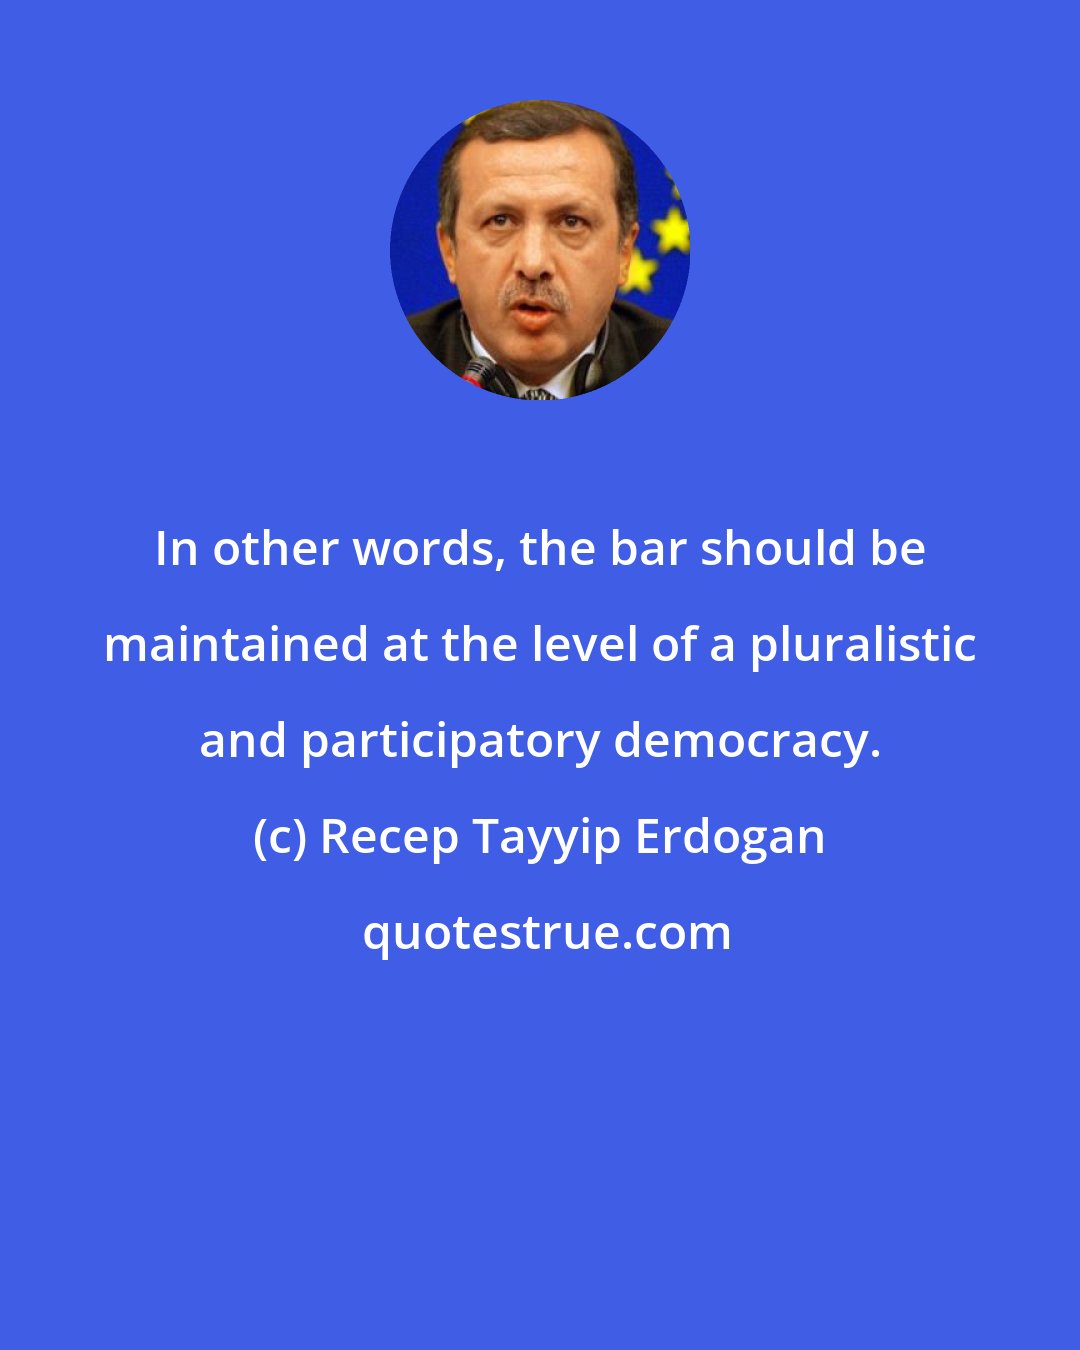 Recep Tayyip Erdogan: In other words, the bar should be maintained at the level of a pluralistic and participatory democracy.